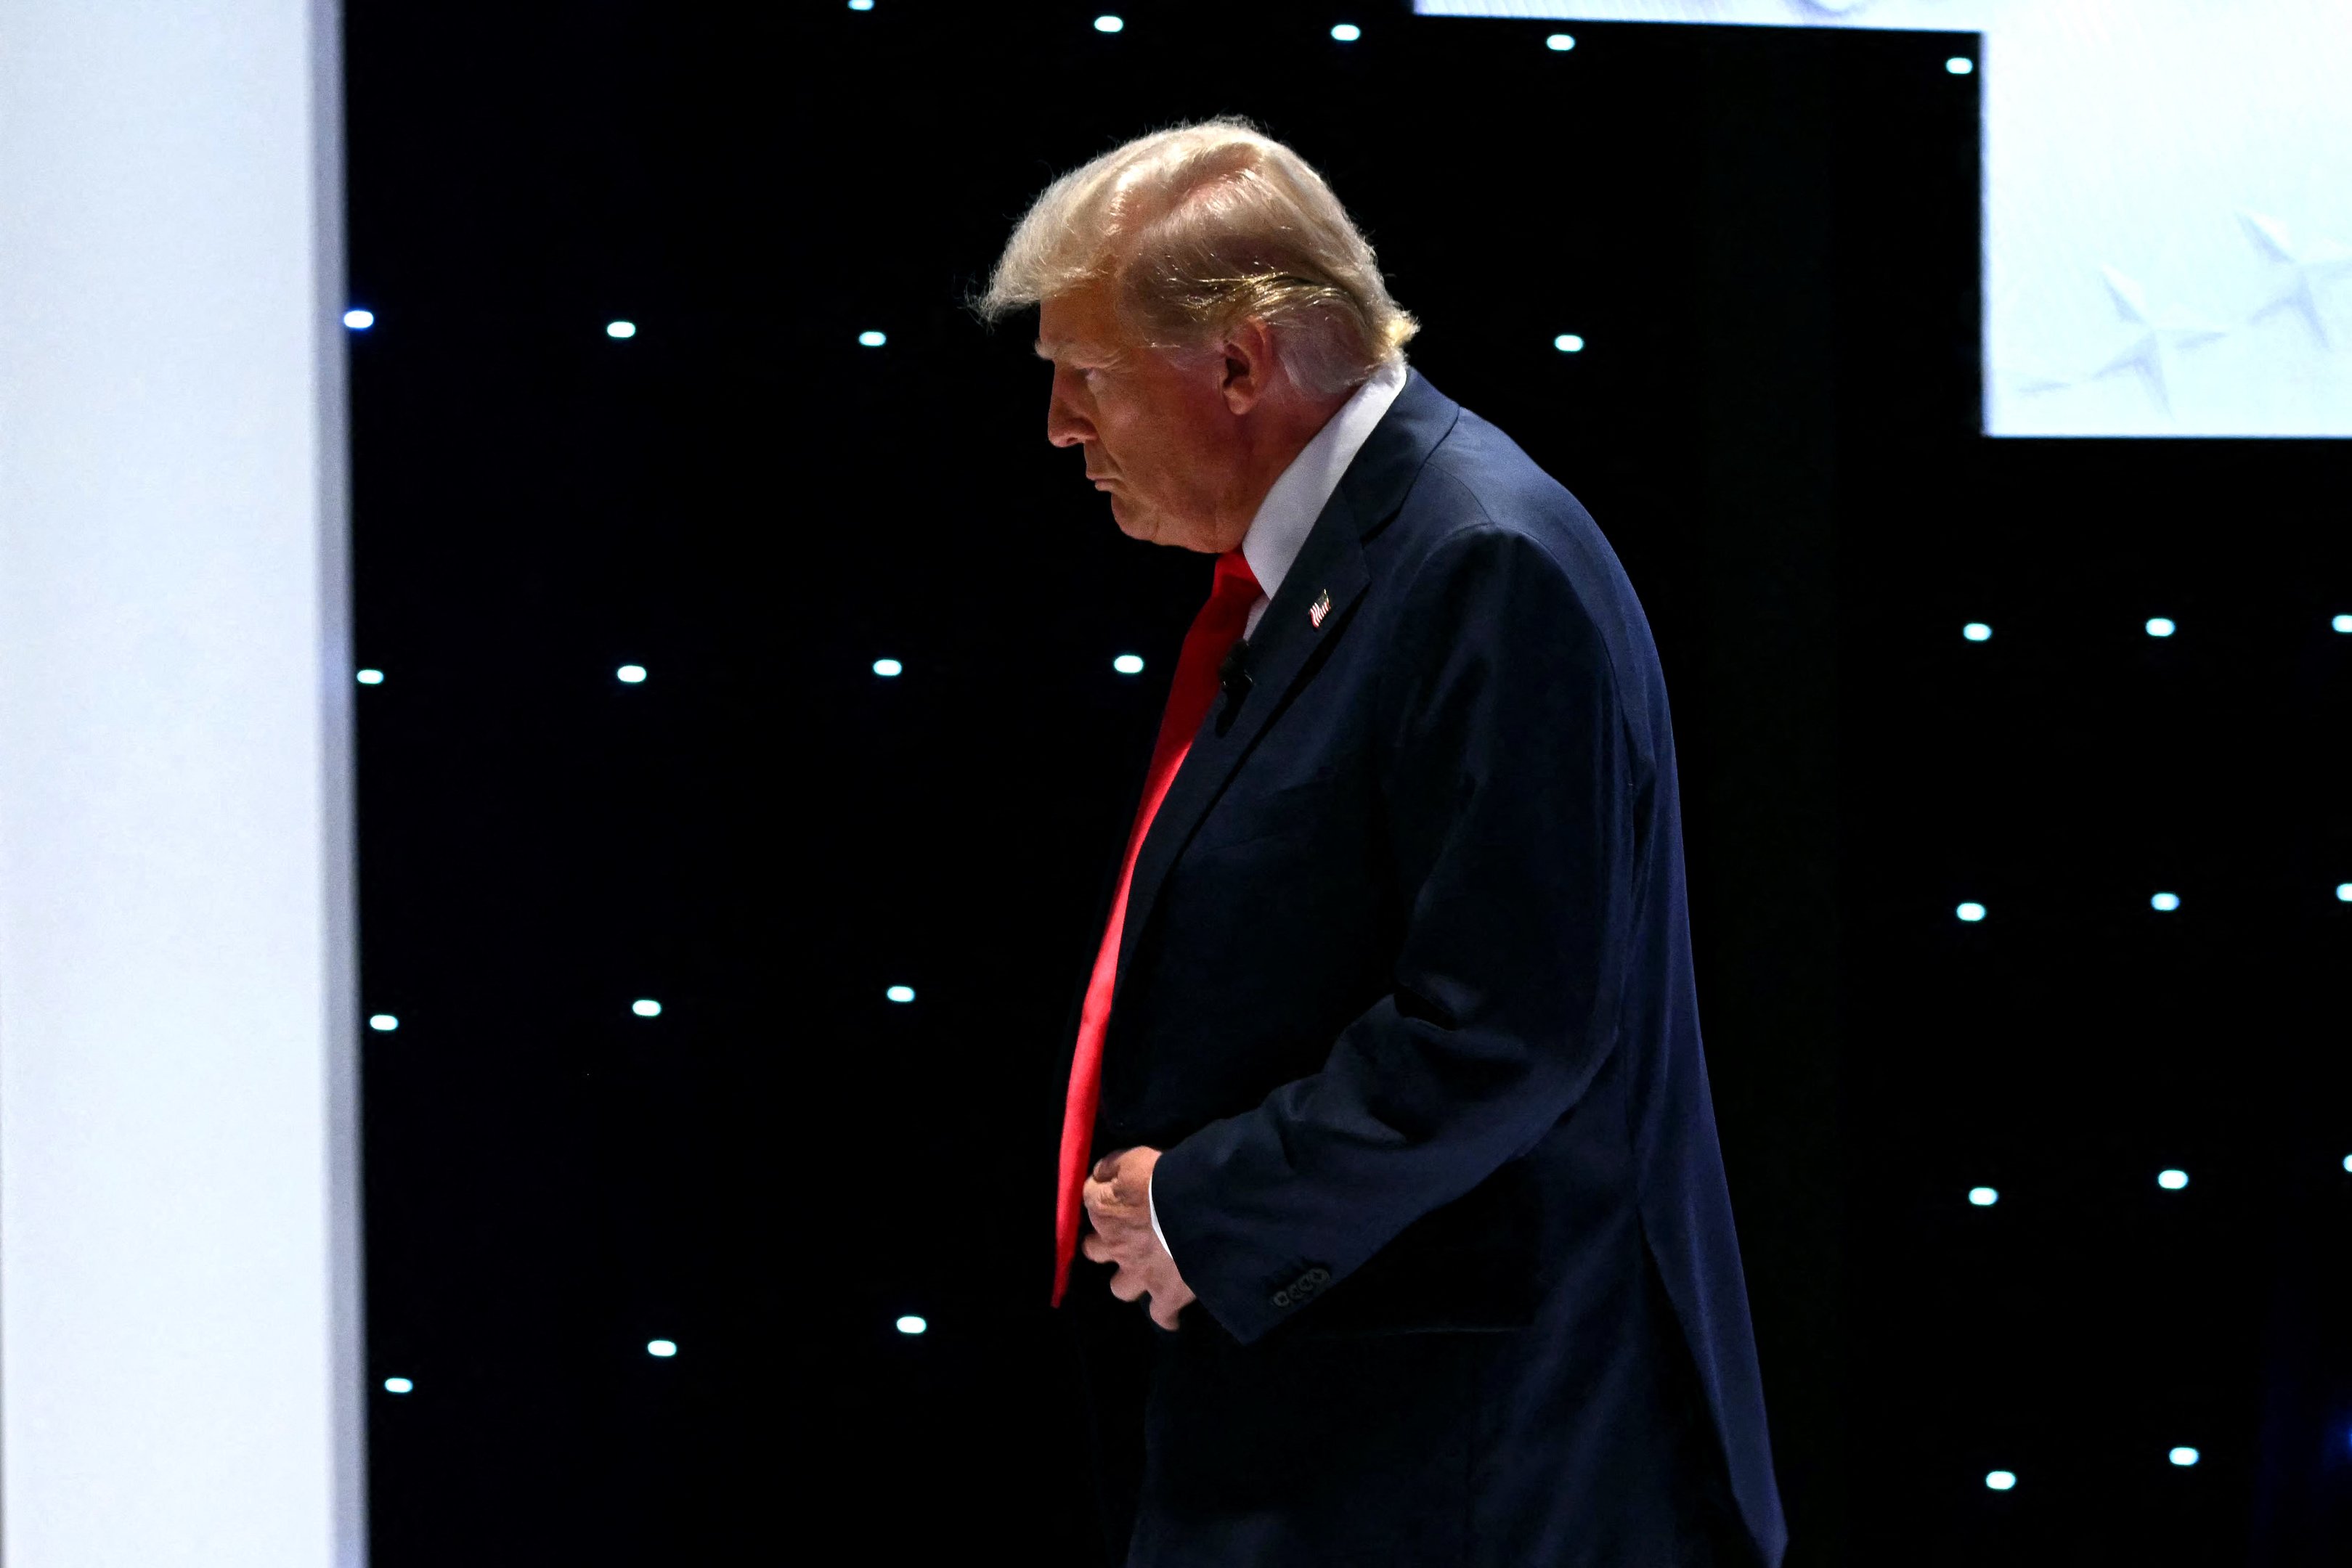 Former US President and Republican presidential candidate Donald Trump leaves the stage during a commercial break as he participates in the first presidential debate of the 2024 elections with US President Joe Biden at CNN's studios in Atlanta, Georgia, on June 27, 2024. (Photo by ANDREW CABALLERO-REYNOLDS / AFP)